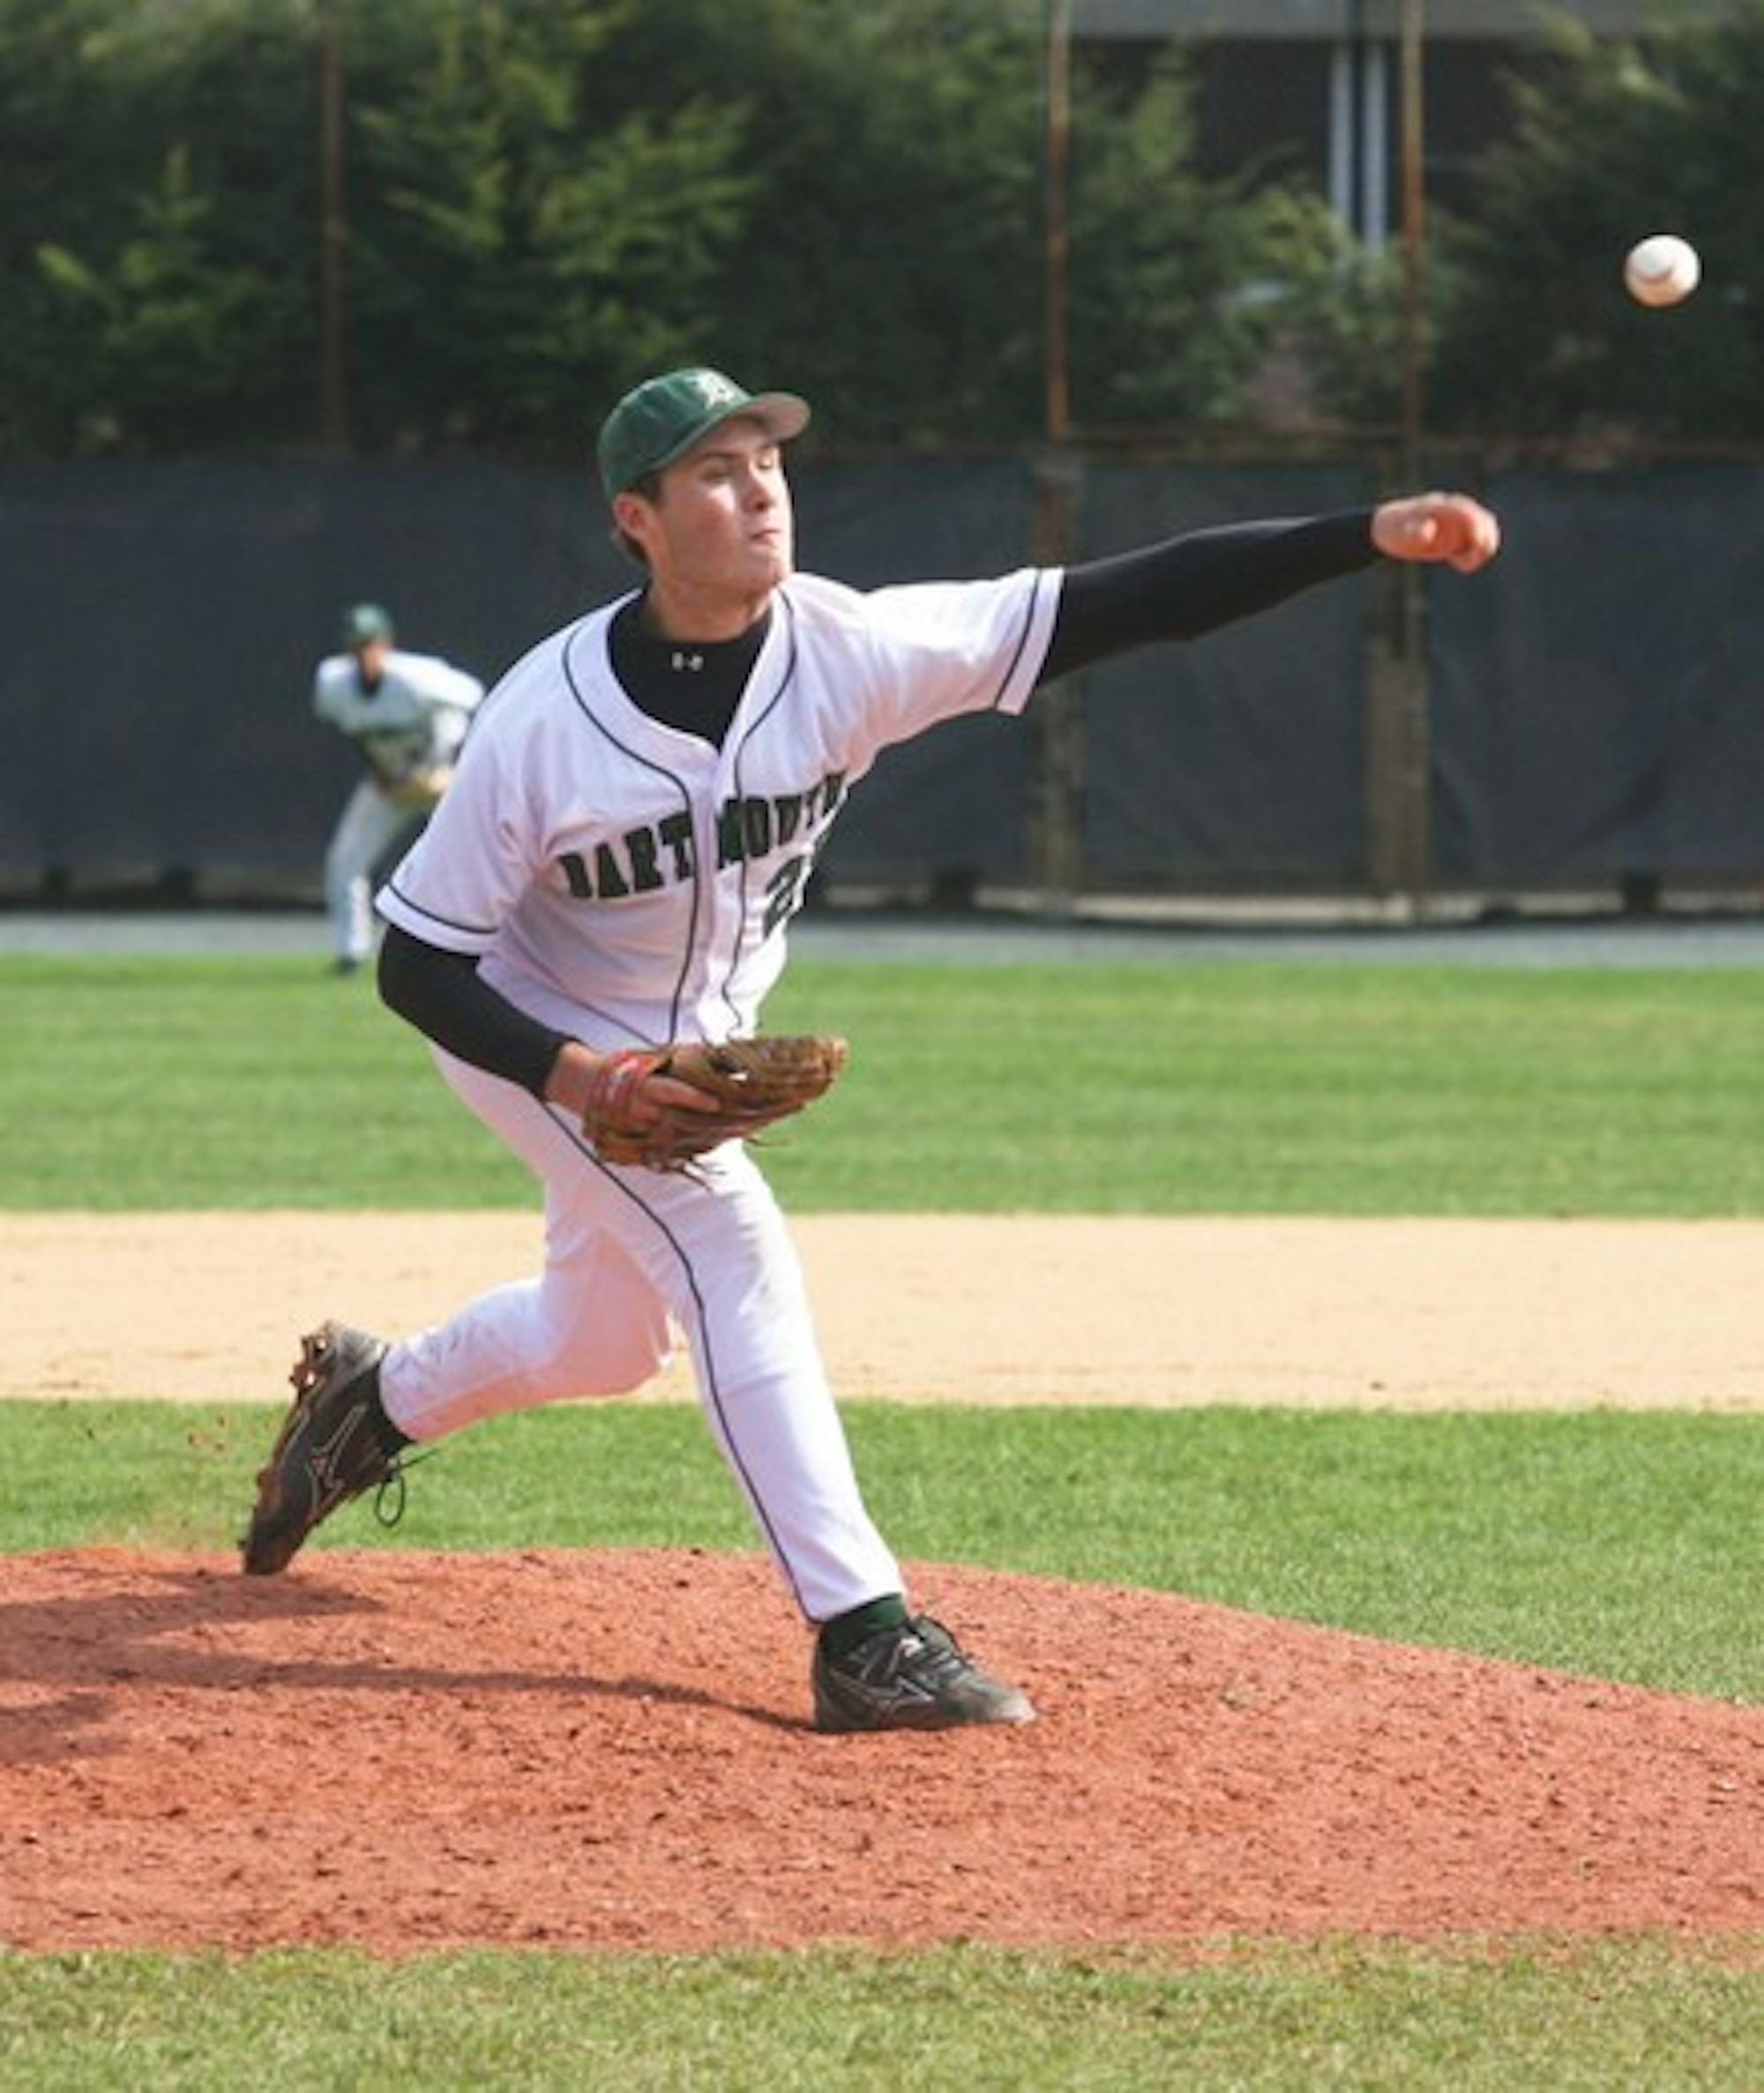 Dartmouth's pitching staff has a 5.74 earned run average, third best in the Ivy League, and a combined record of 24 victories, the highest in the league.